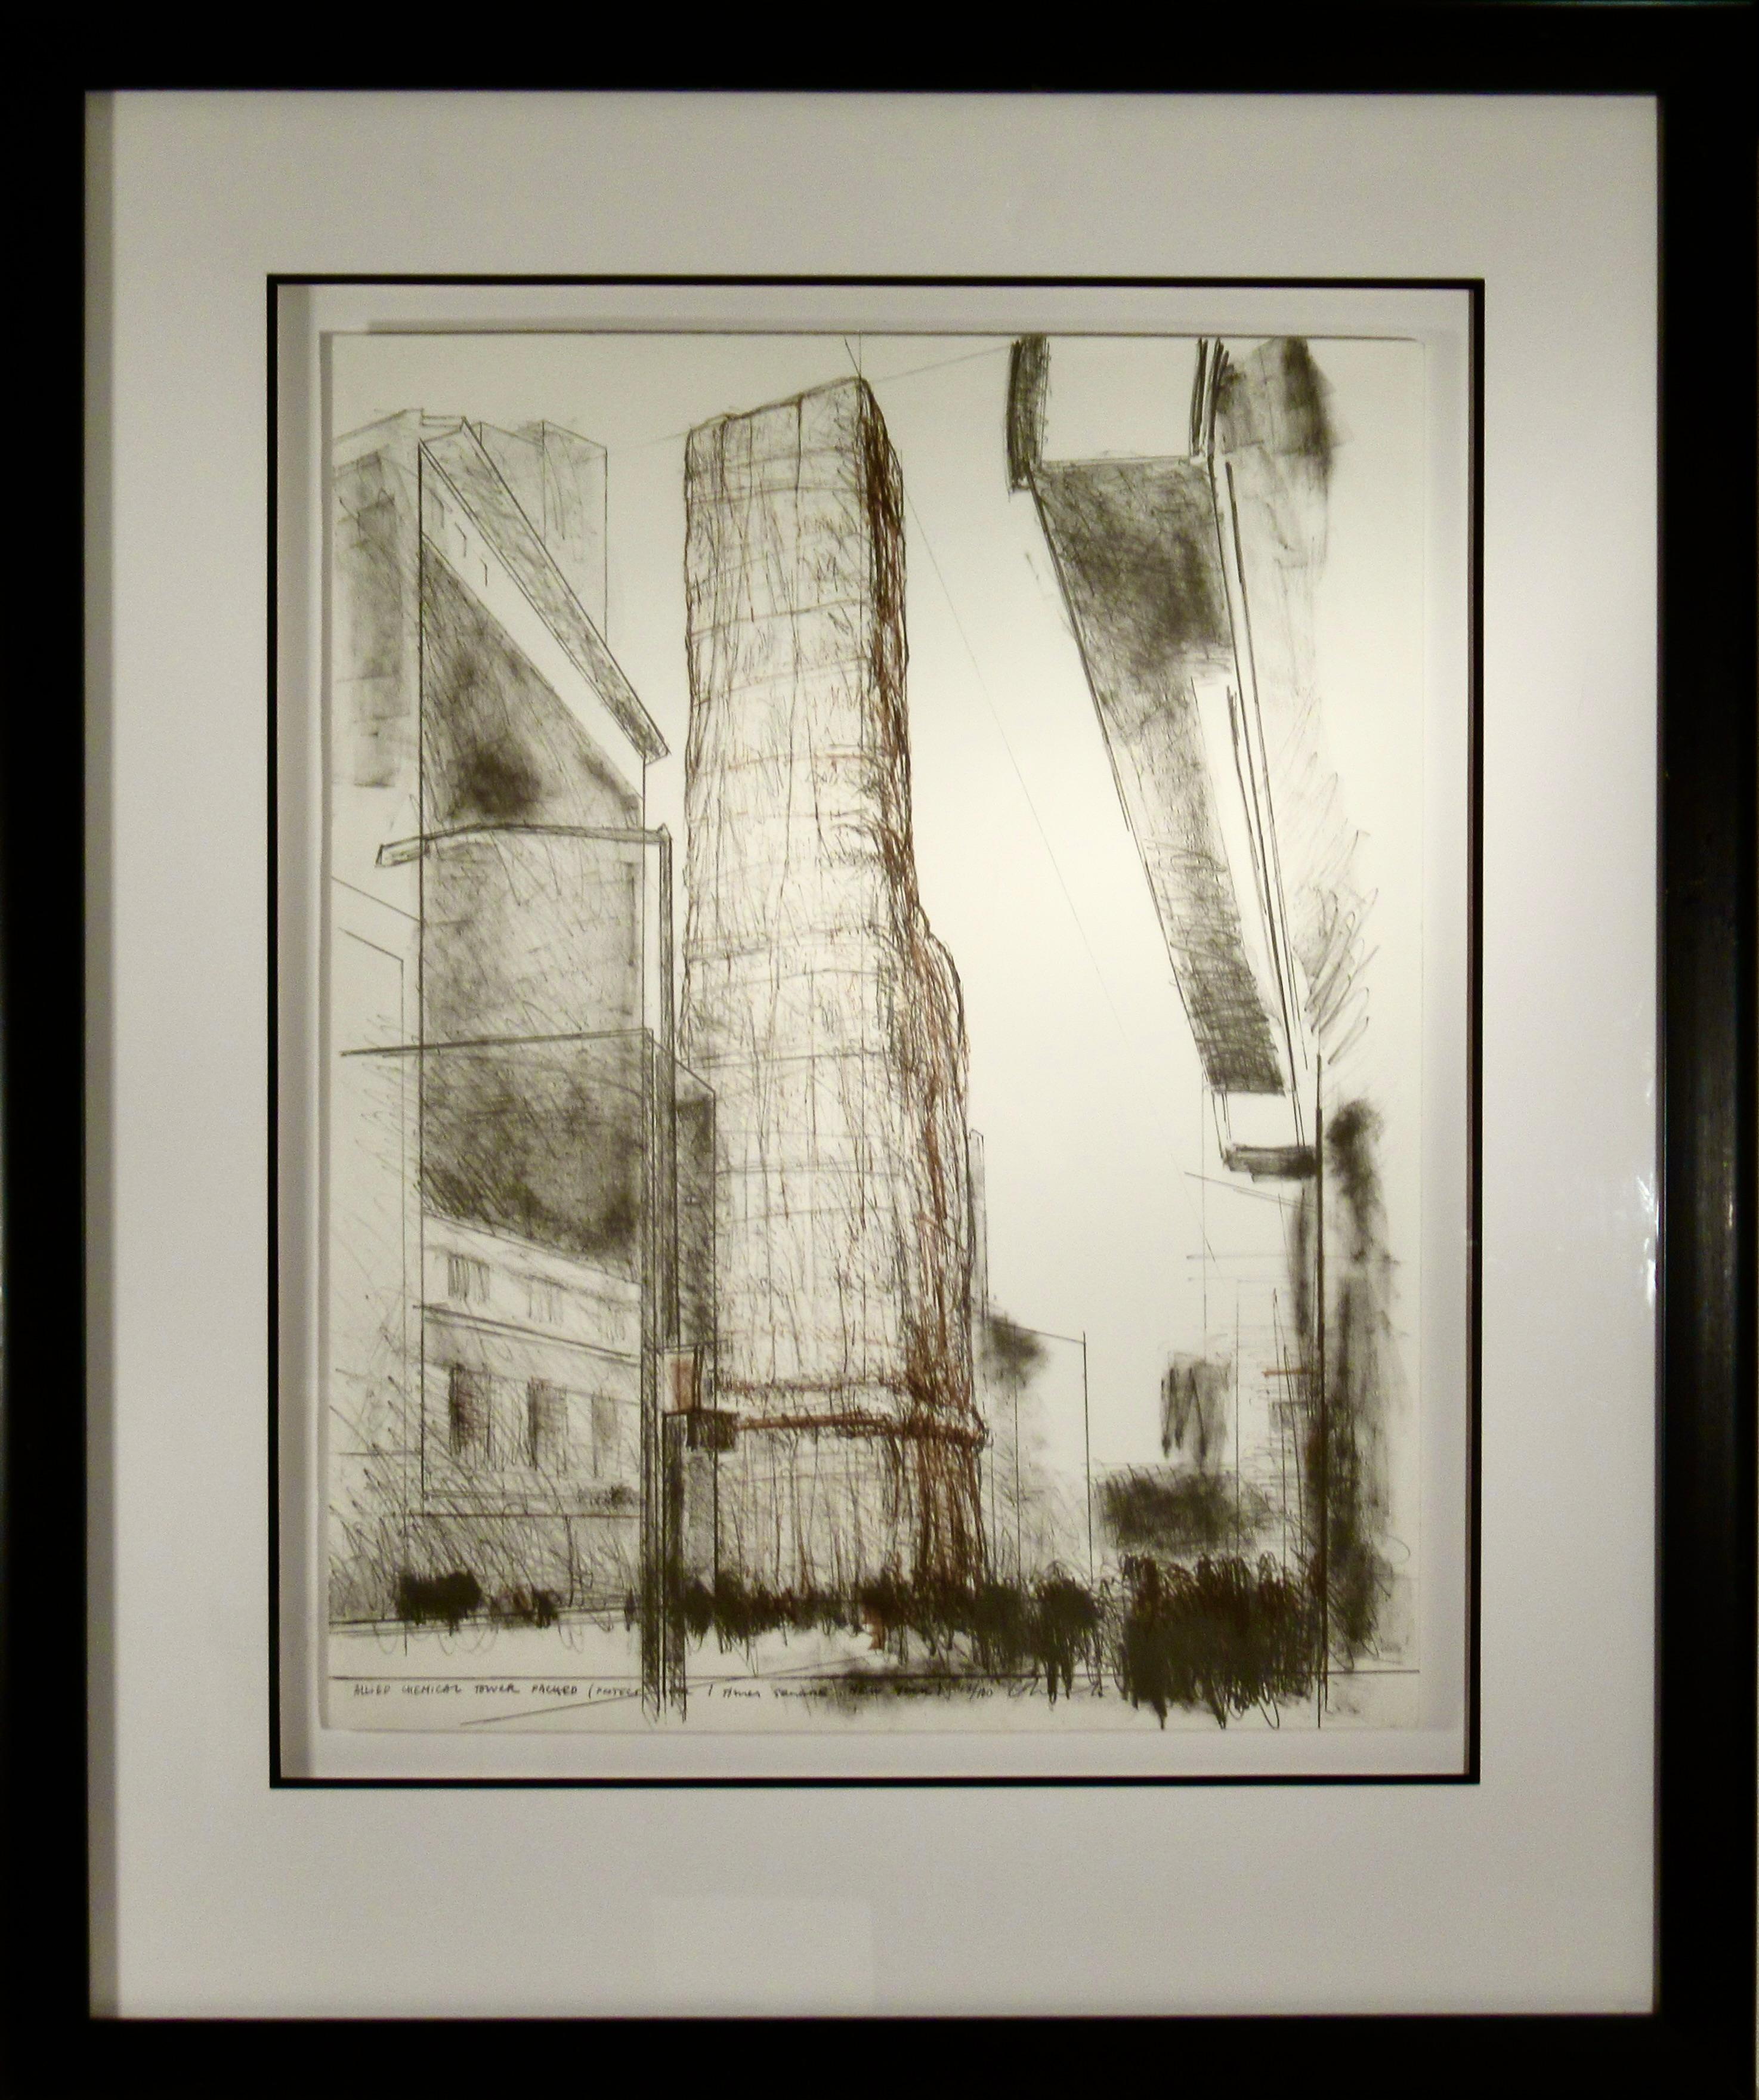 Christo Javacheff Abstract Print – Packed, Projekt für Nummer 1 Time Square New York, „Allied Chemical Tower“